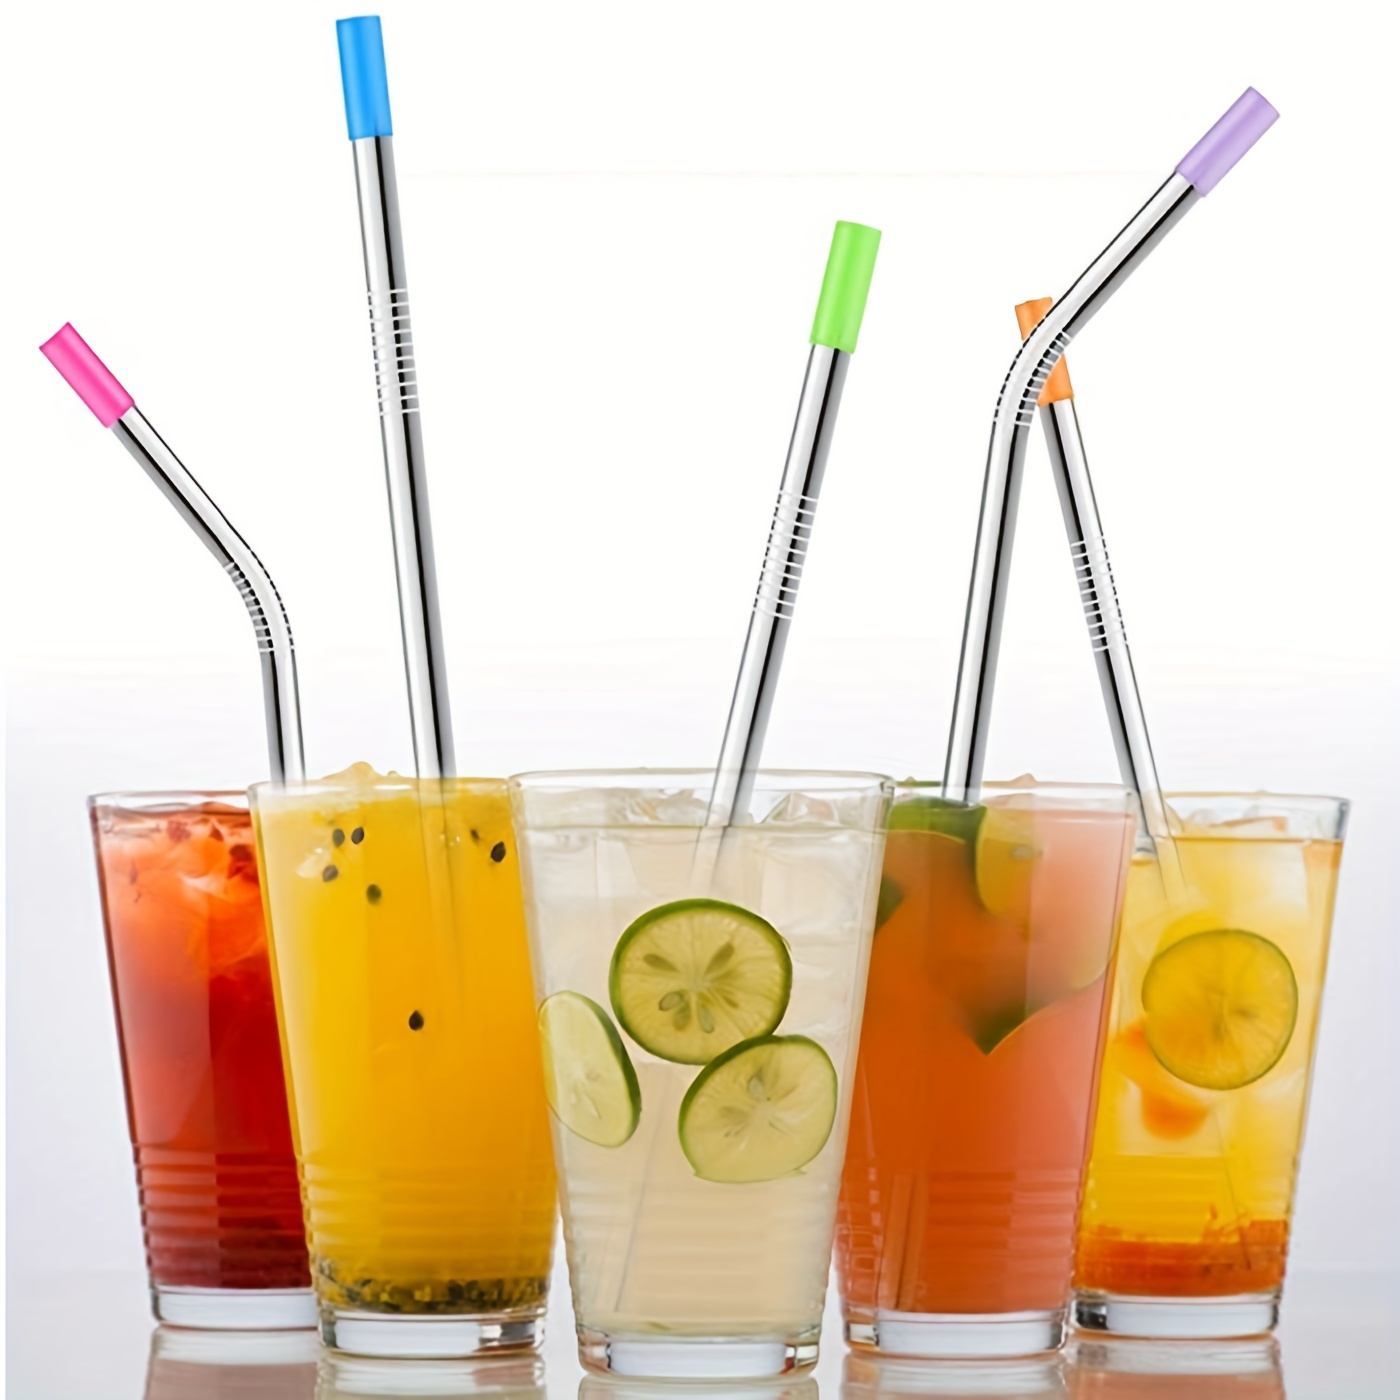 Stainless Steel Straws With Silicone Tips & Cleaning Brush 4 Pcs Set  17311009 DEXAM